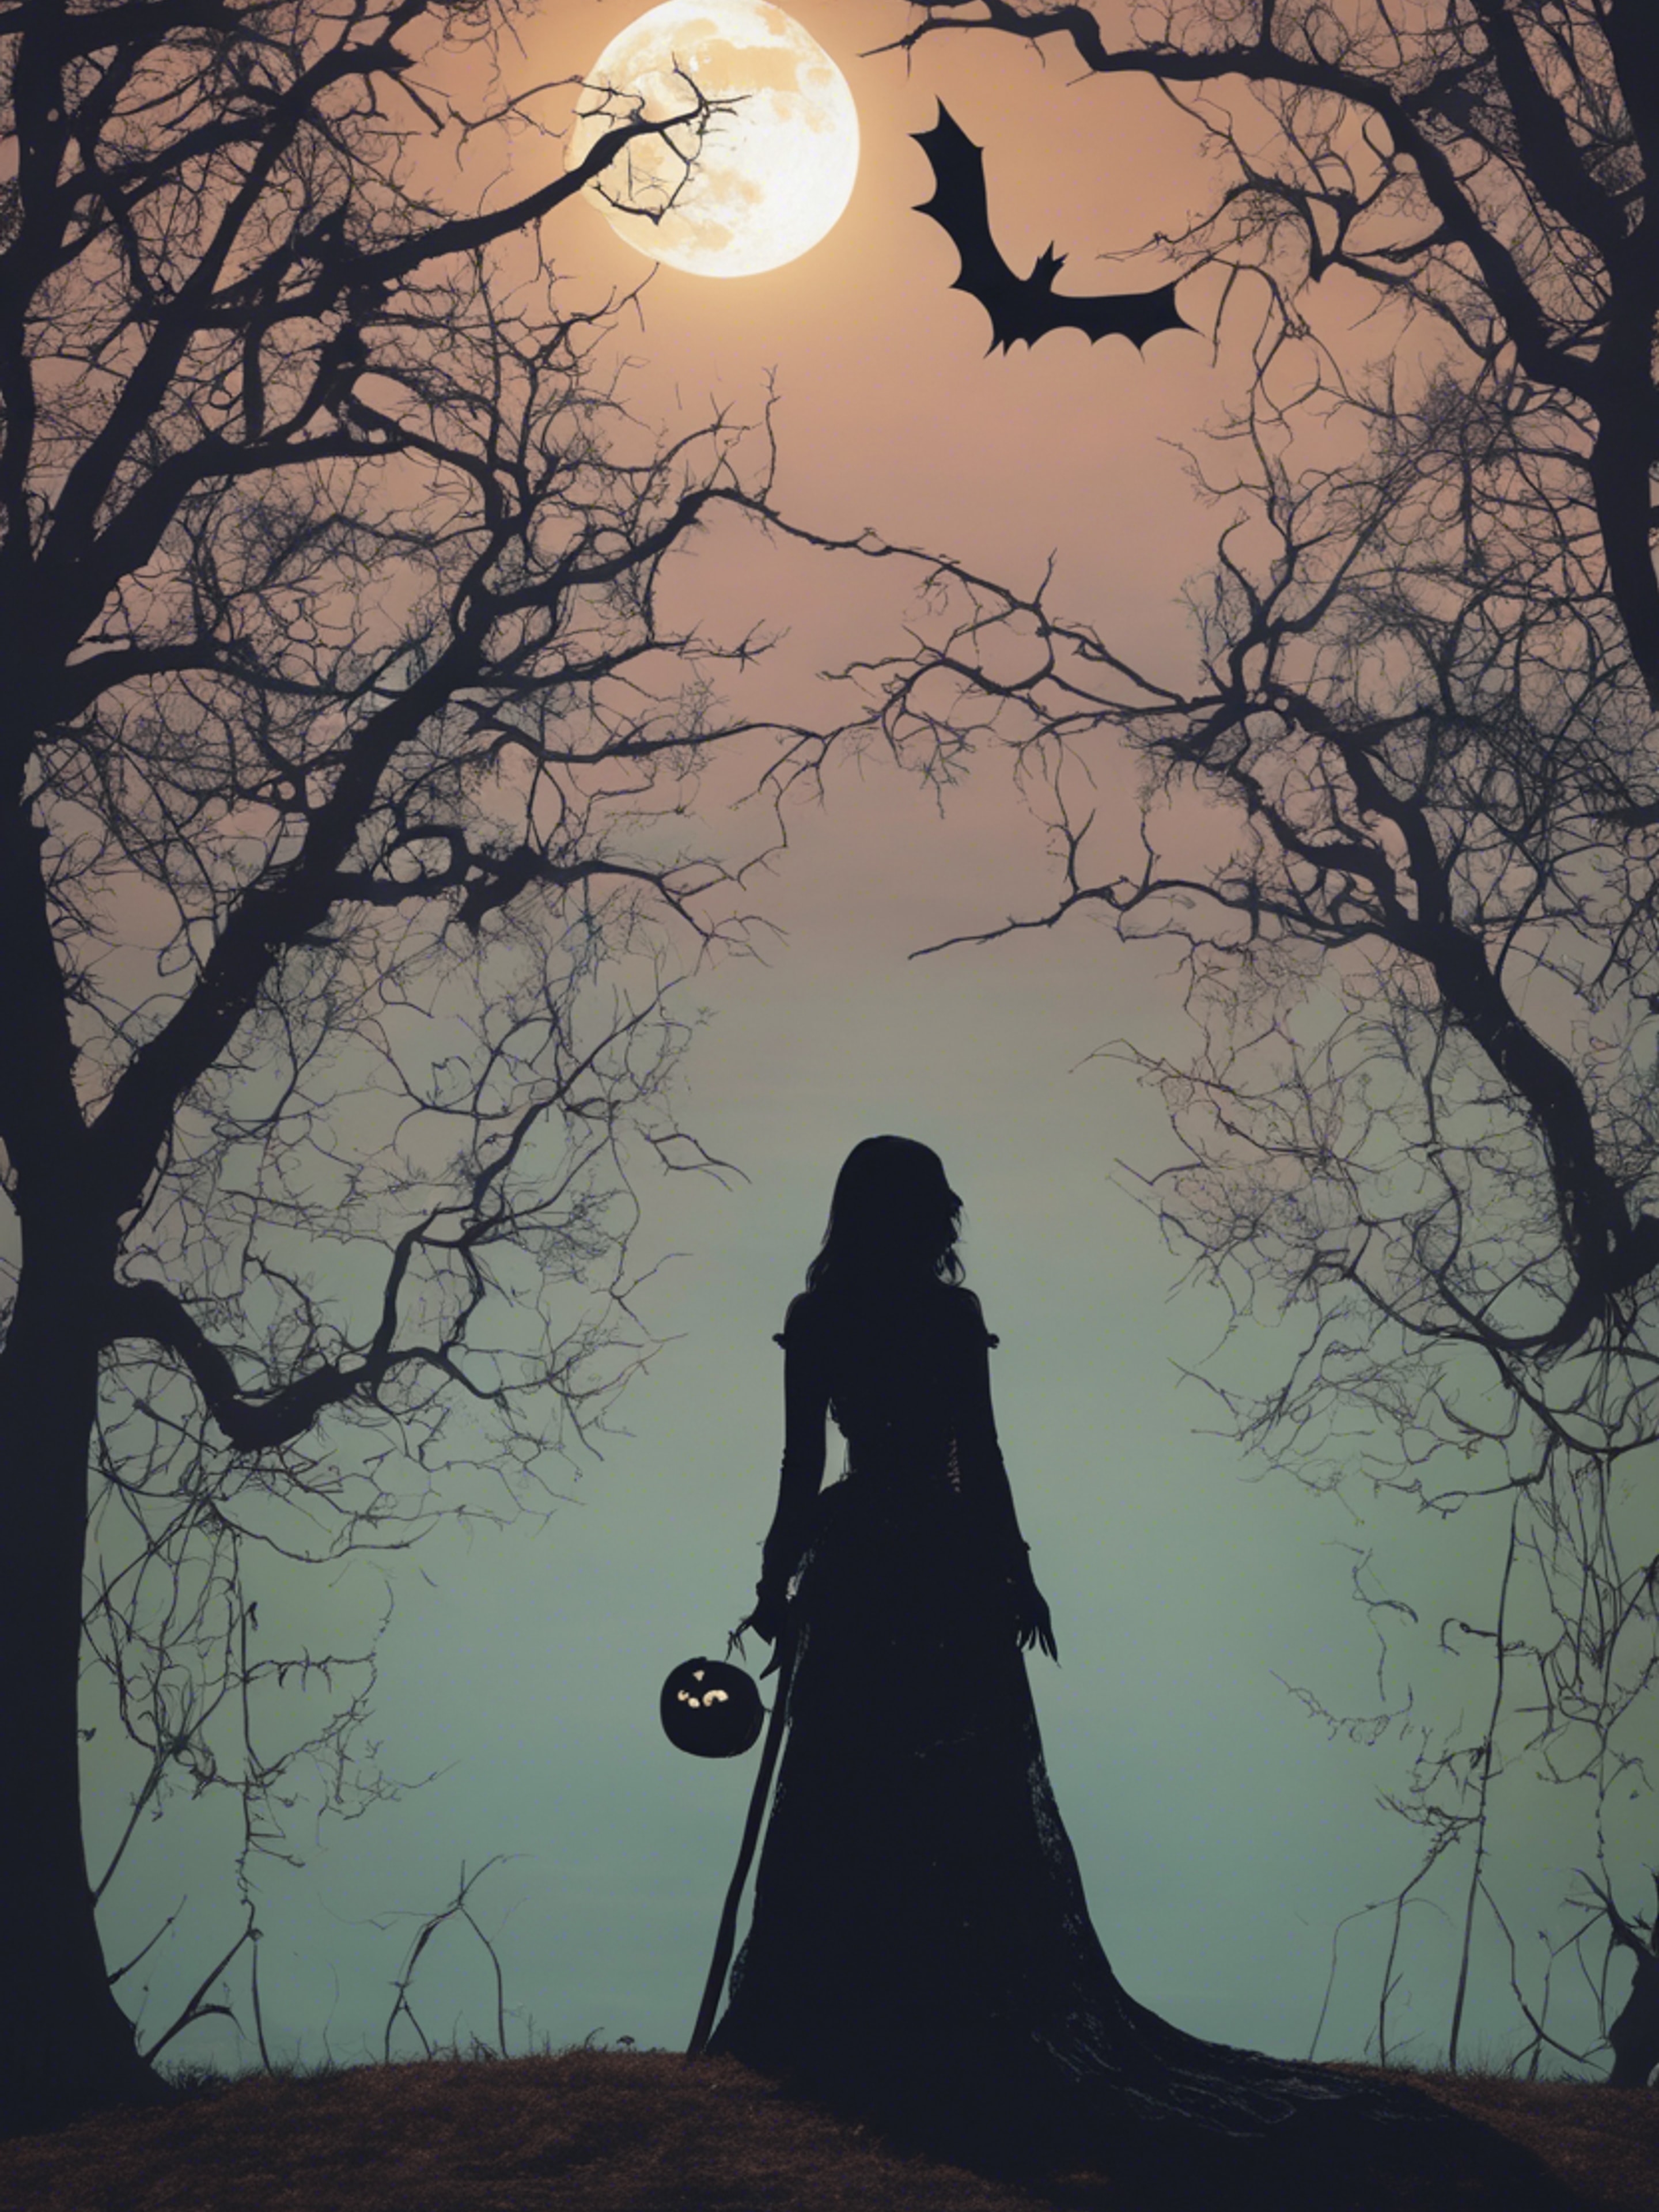 A pastel gothic art piece featuring a halloween-inspired silhouette against a full moon. Wallpaper[0c56d77b25284c4fbd1c]